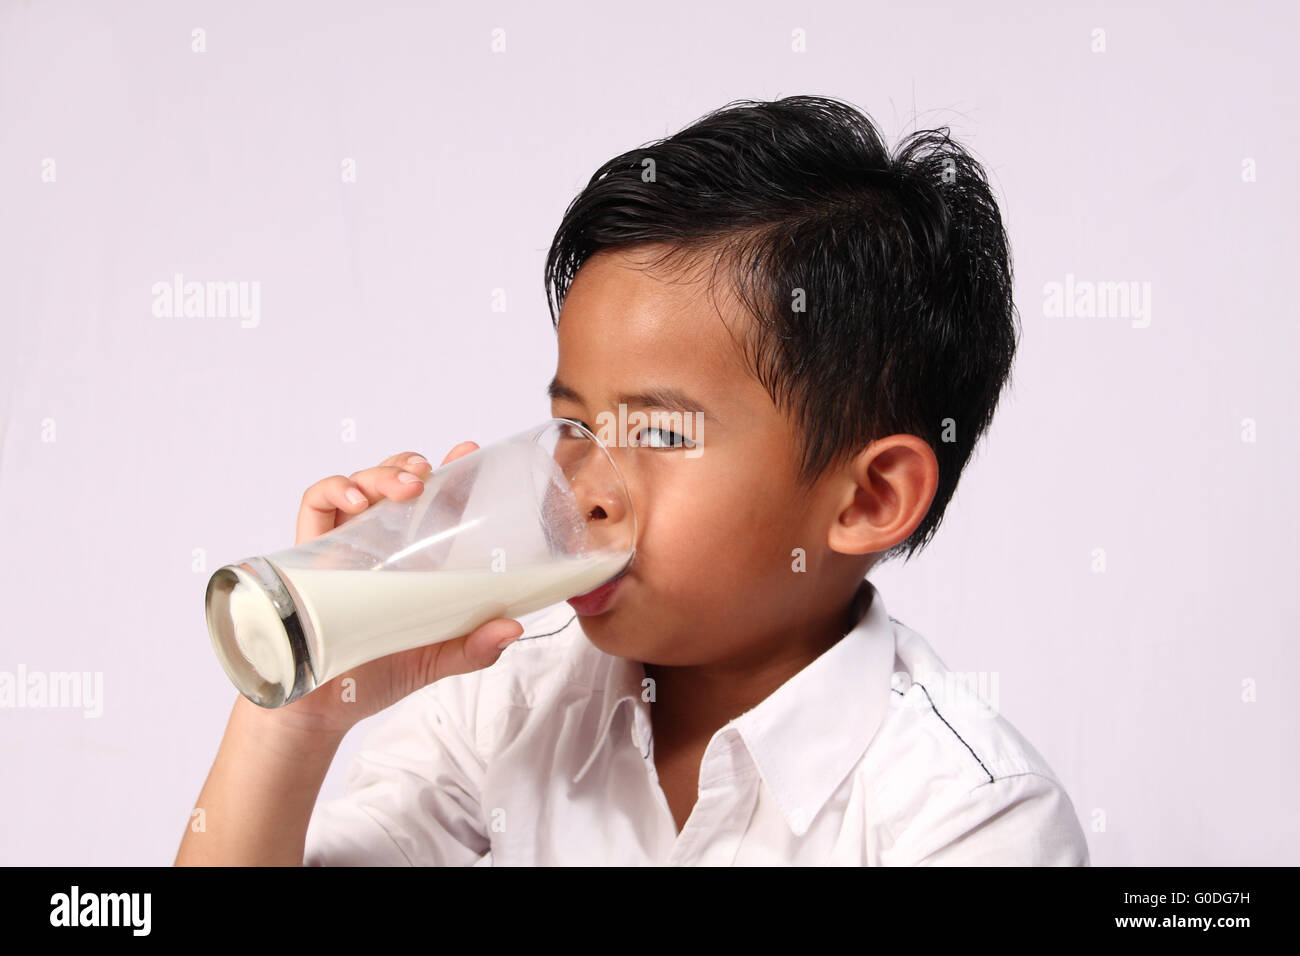 Happy and smiling Asian boy drinking a glass of milk Stock Photo